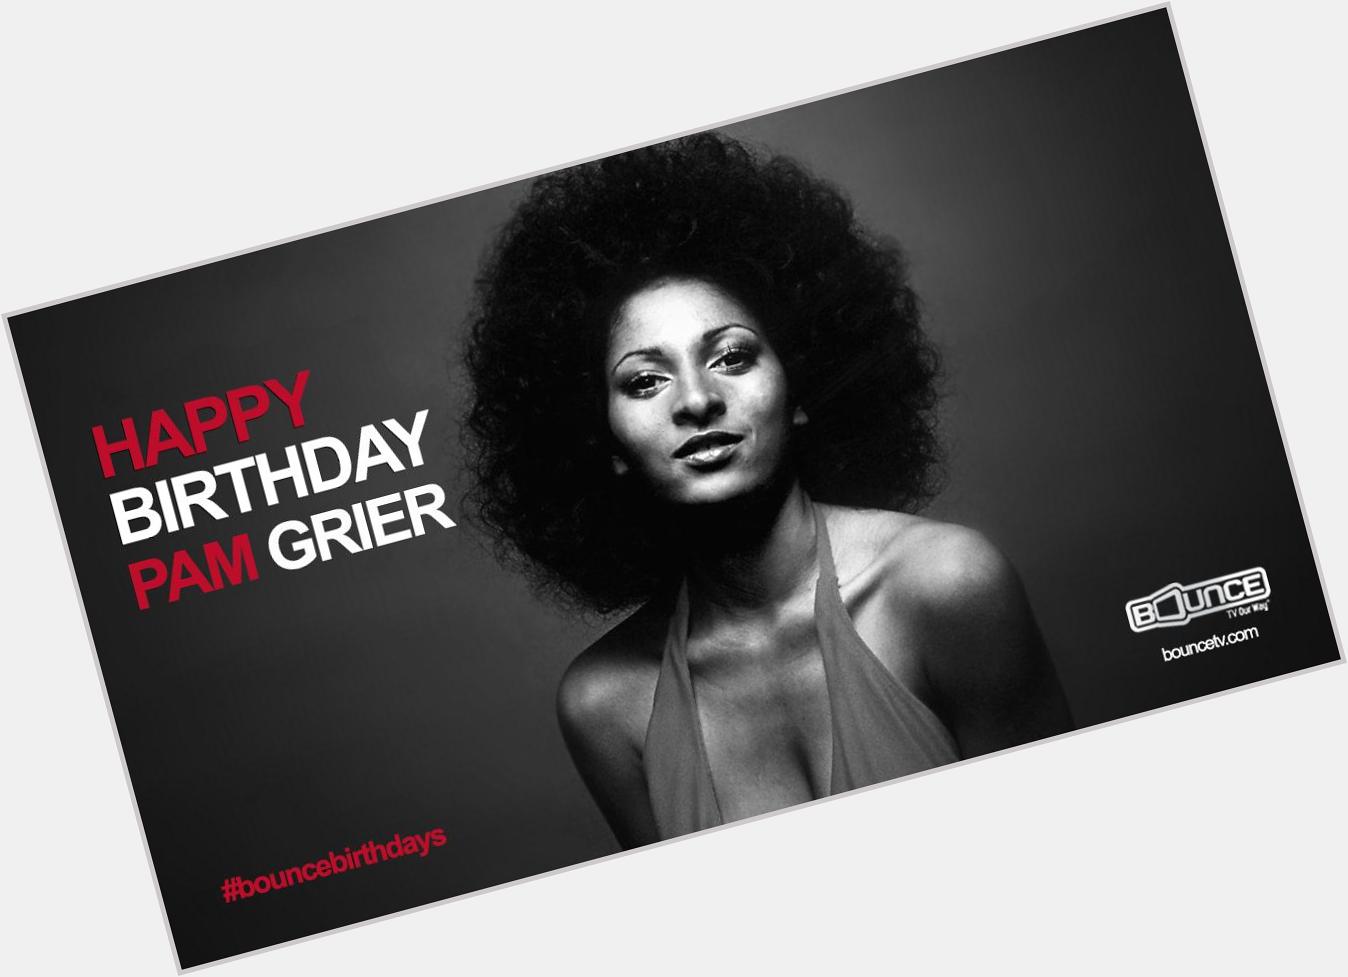 Happy 66th Birthday to favorite, Pam Grier. You still got it, mama!  